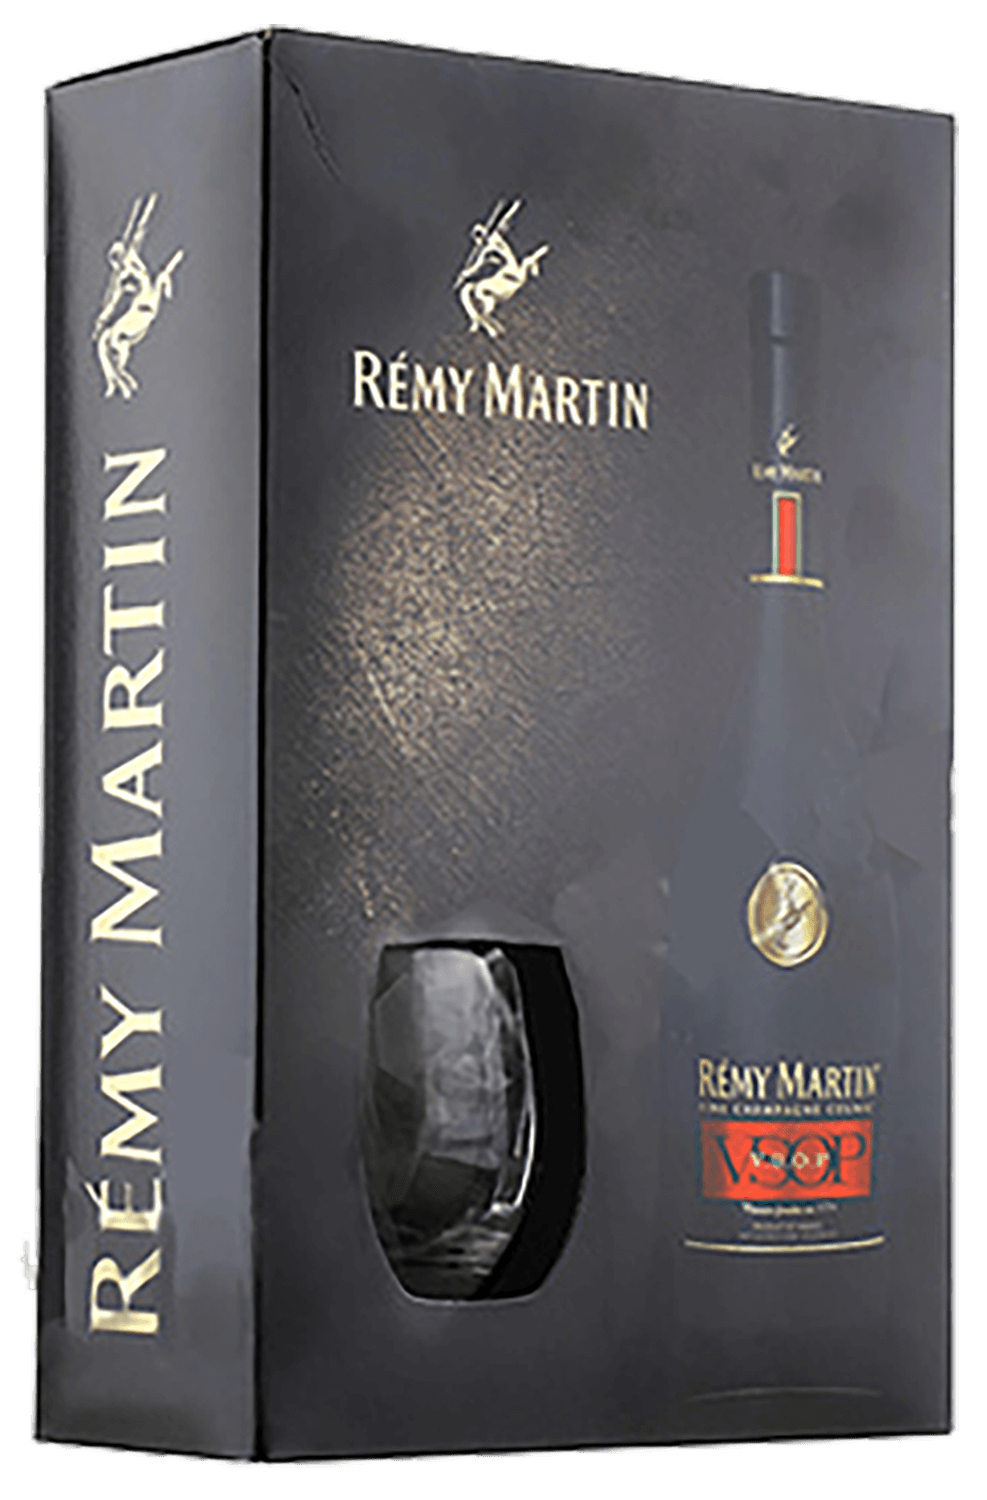 Remy Martin Cognac VSOP (gift box with a glass) remy martin vs superior gift box